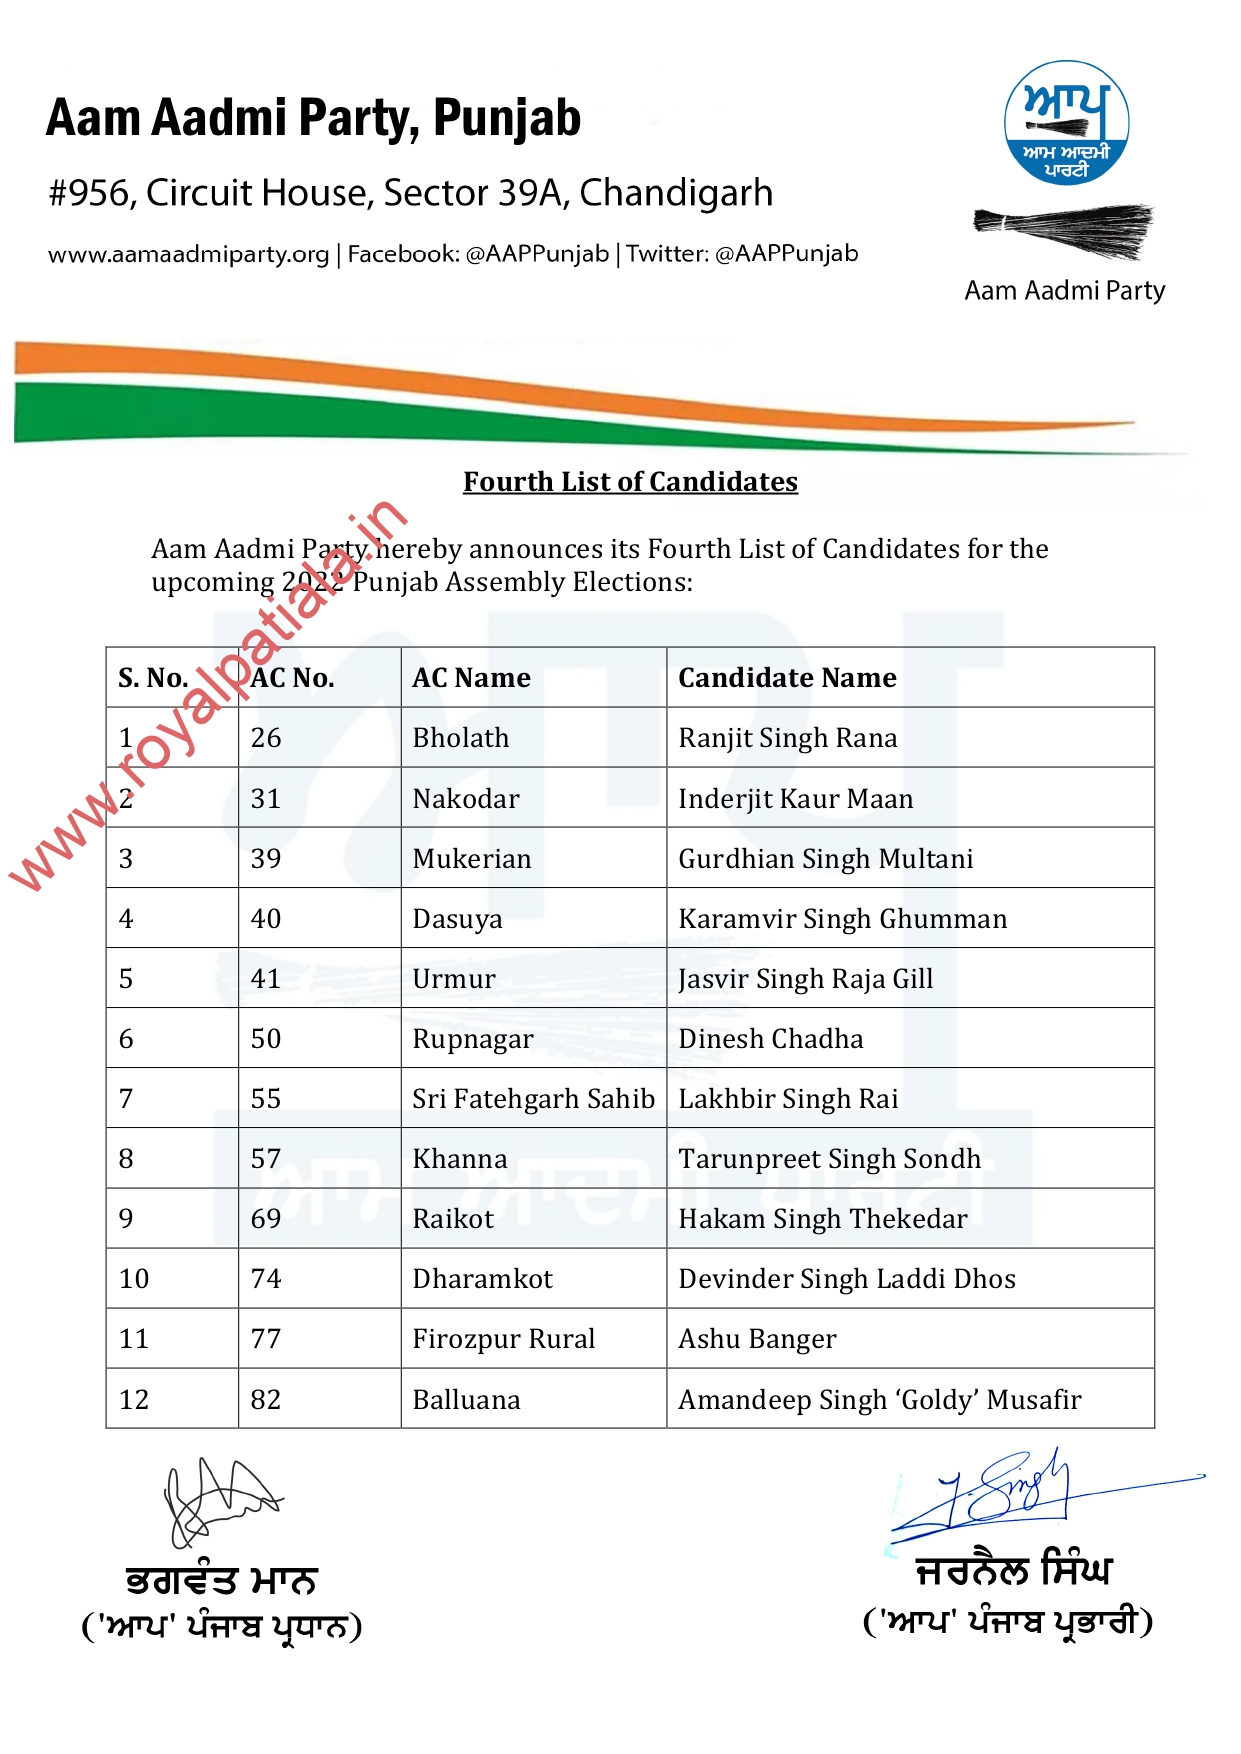 AAP announced 15 more candidates; tally reached 73